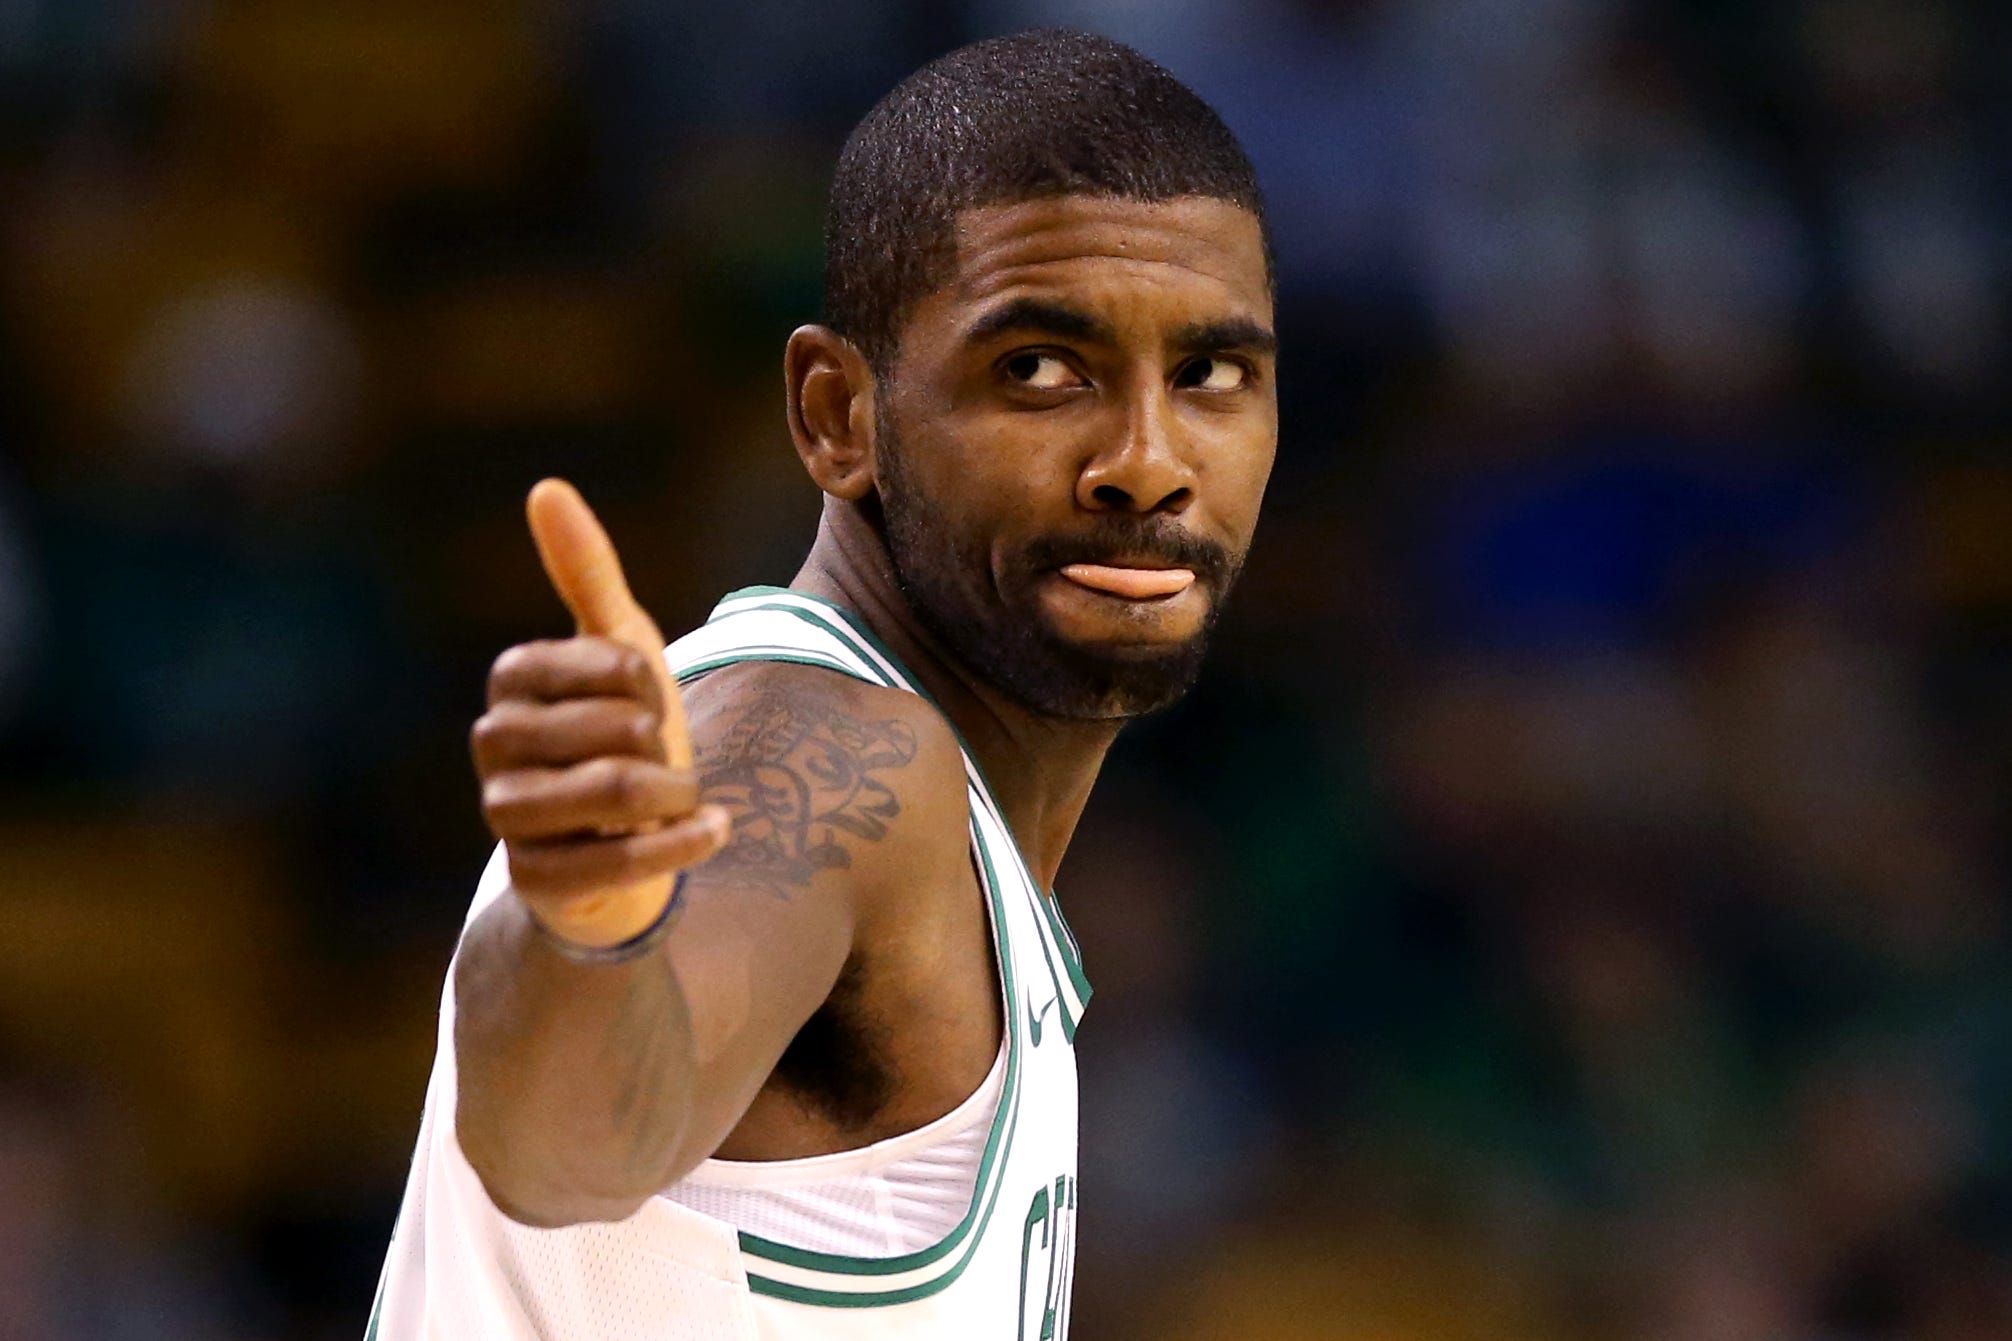 kyrie irving thinks the world is flat